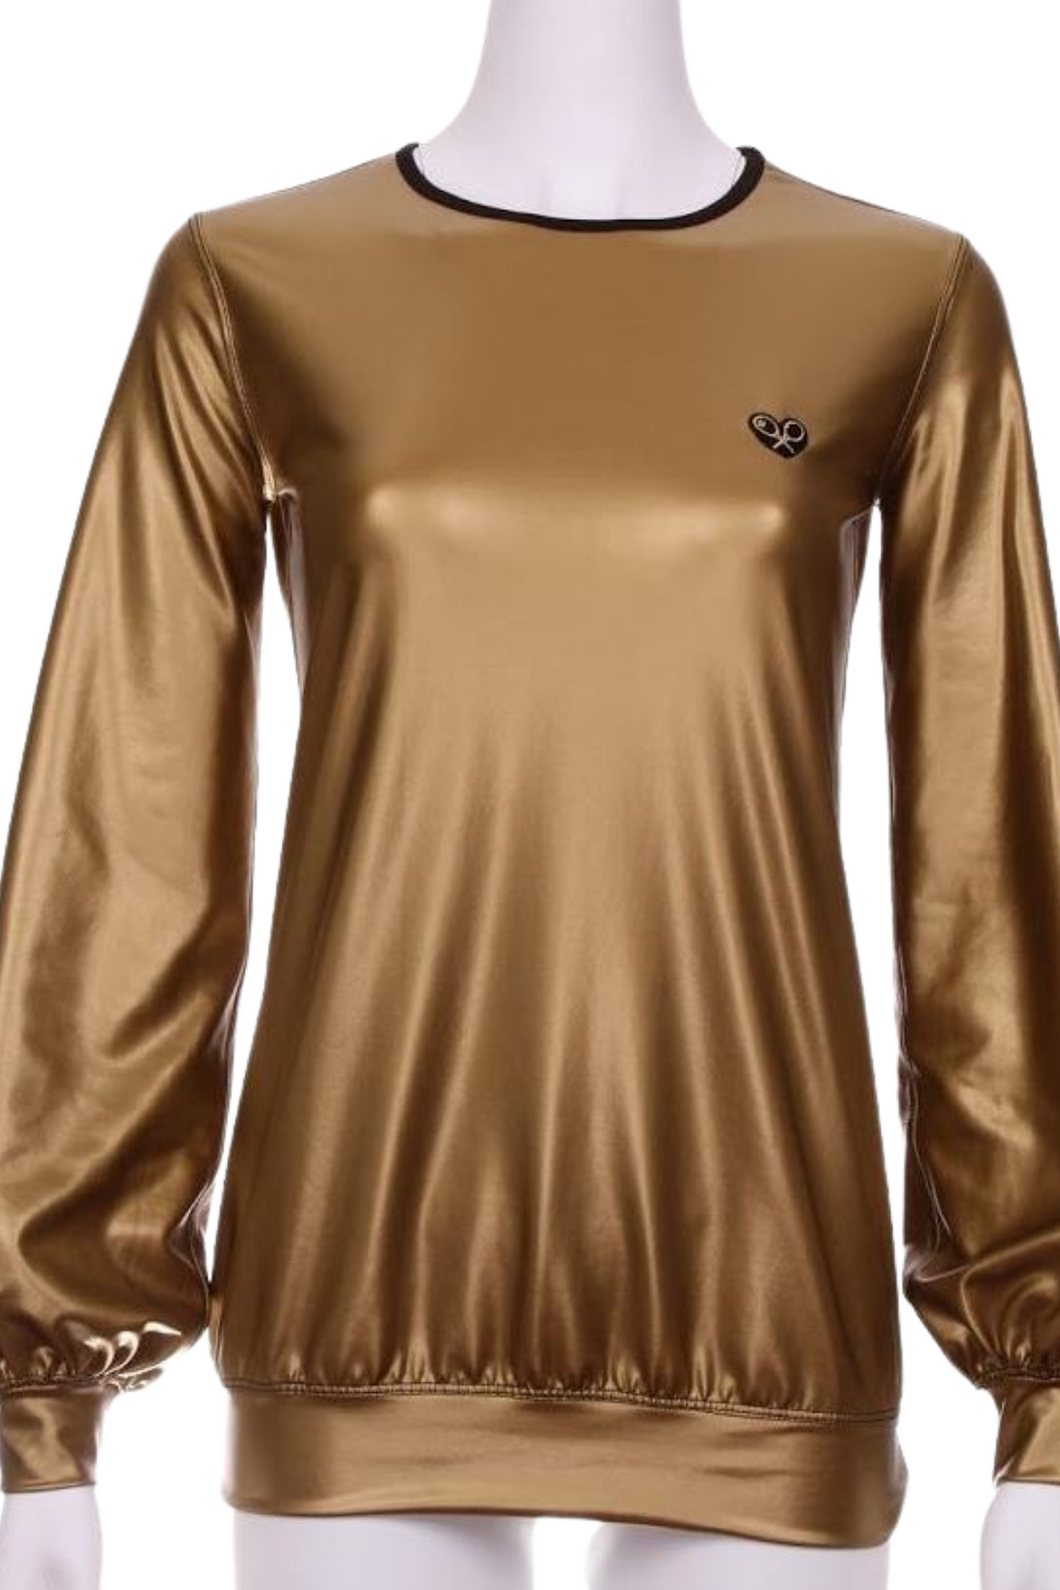 Pleather Gold Long Sleeve Warm Up Top - I LOVE MY DOUBLES PARTNER!!!